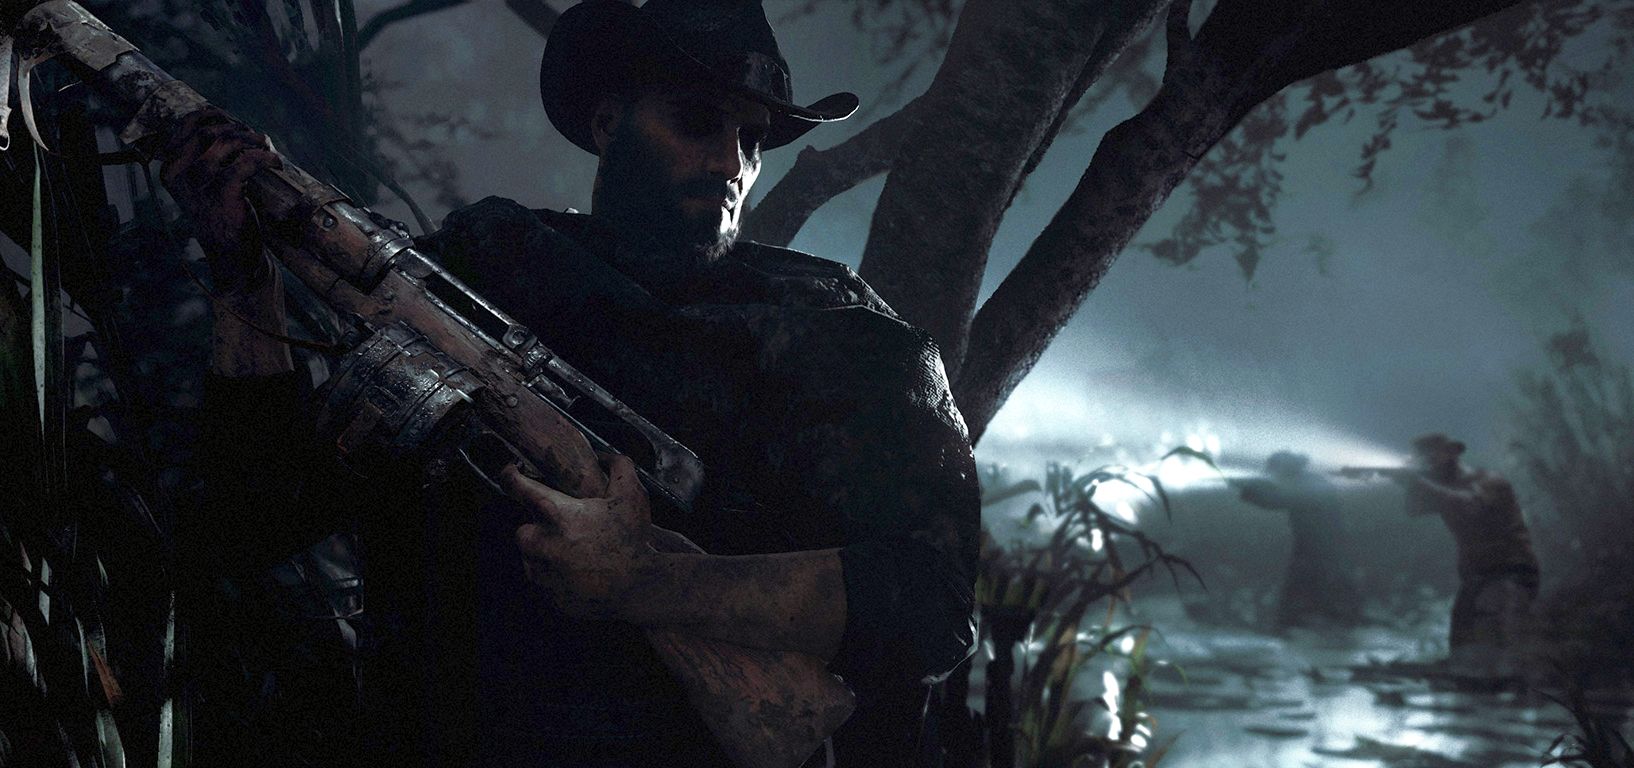 Image for Hunt: Showdown update adds some lovely stealth weapons